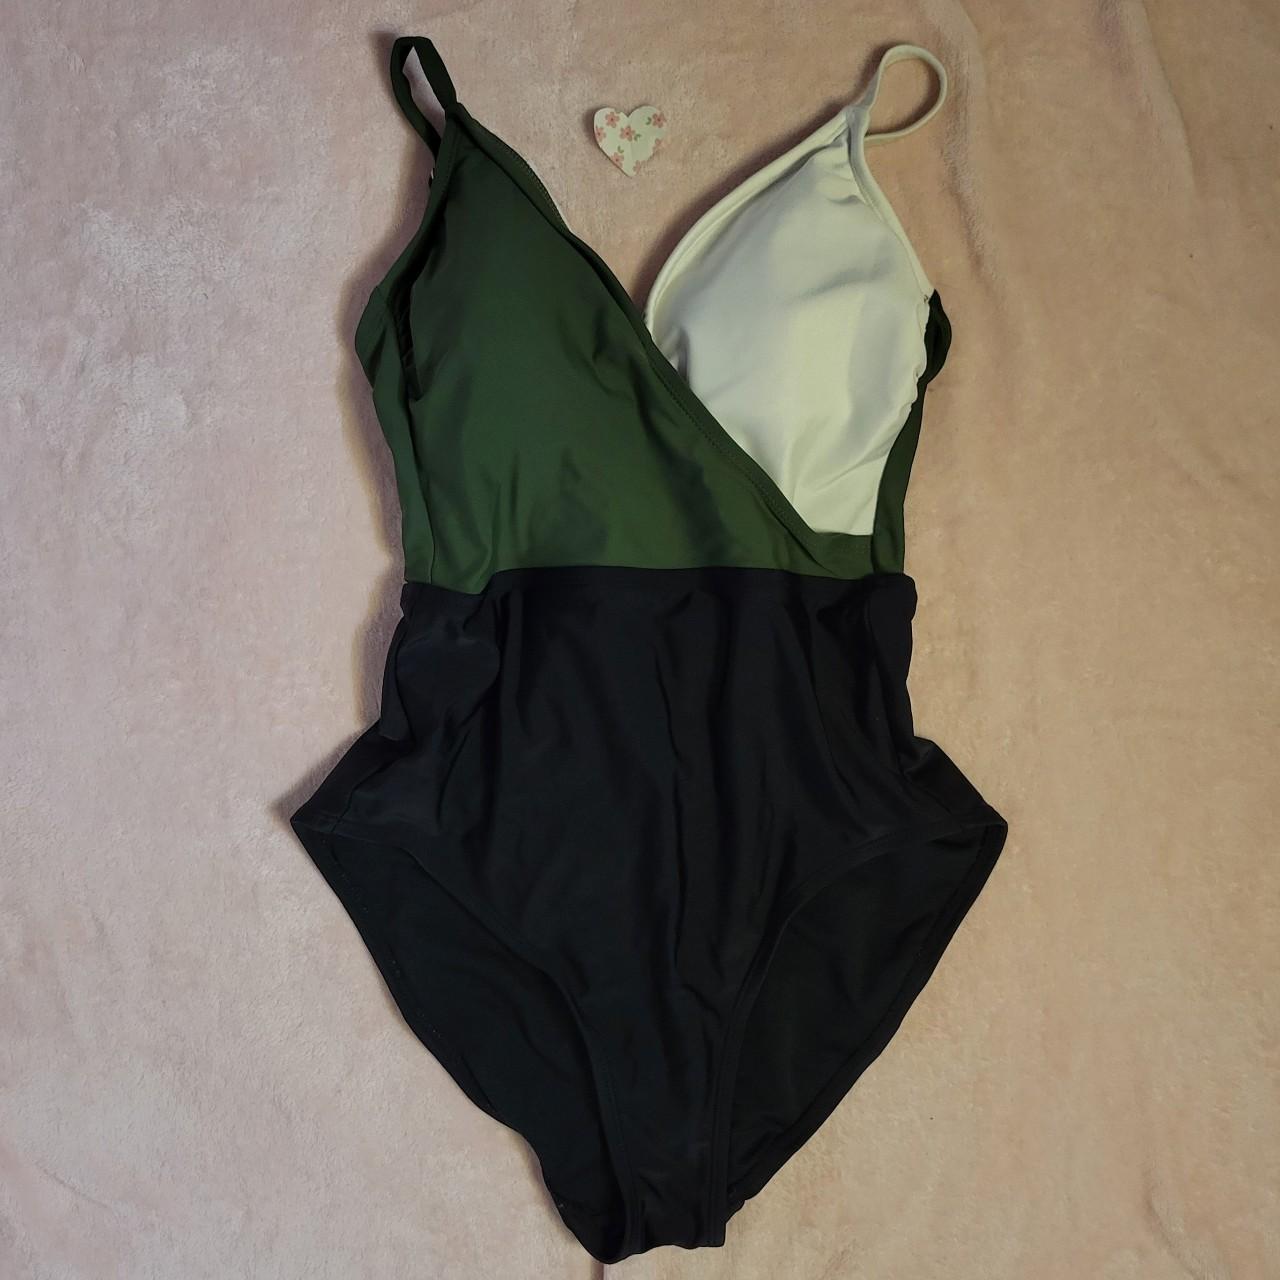 Product Image 1 - LISTING FOR TWO SWIMSUITS 

1